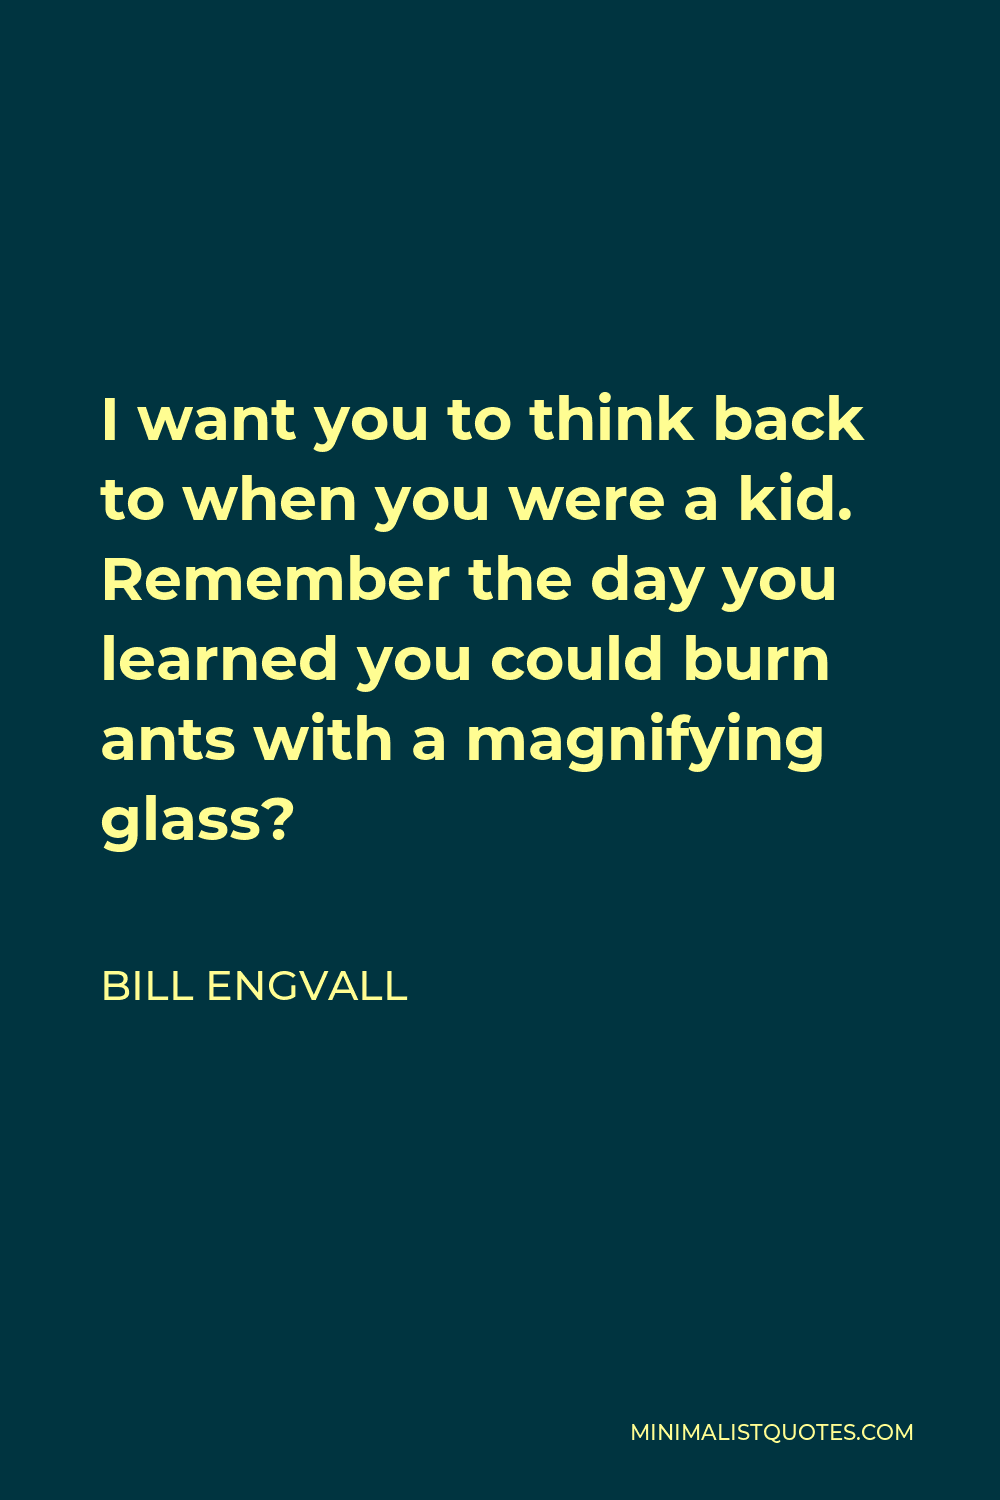 Bill Engvall Quote - I want you to think back to when you were a kid. Remember the day you learned you could burn ants with a magnifying glass?